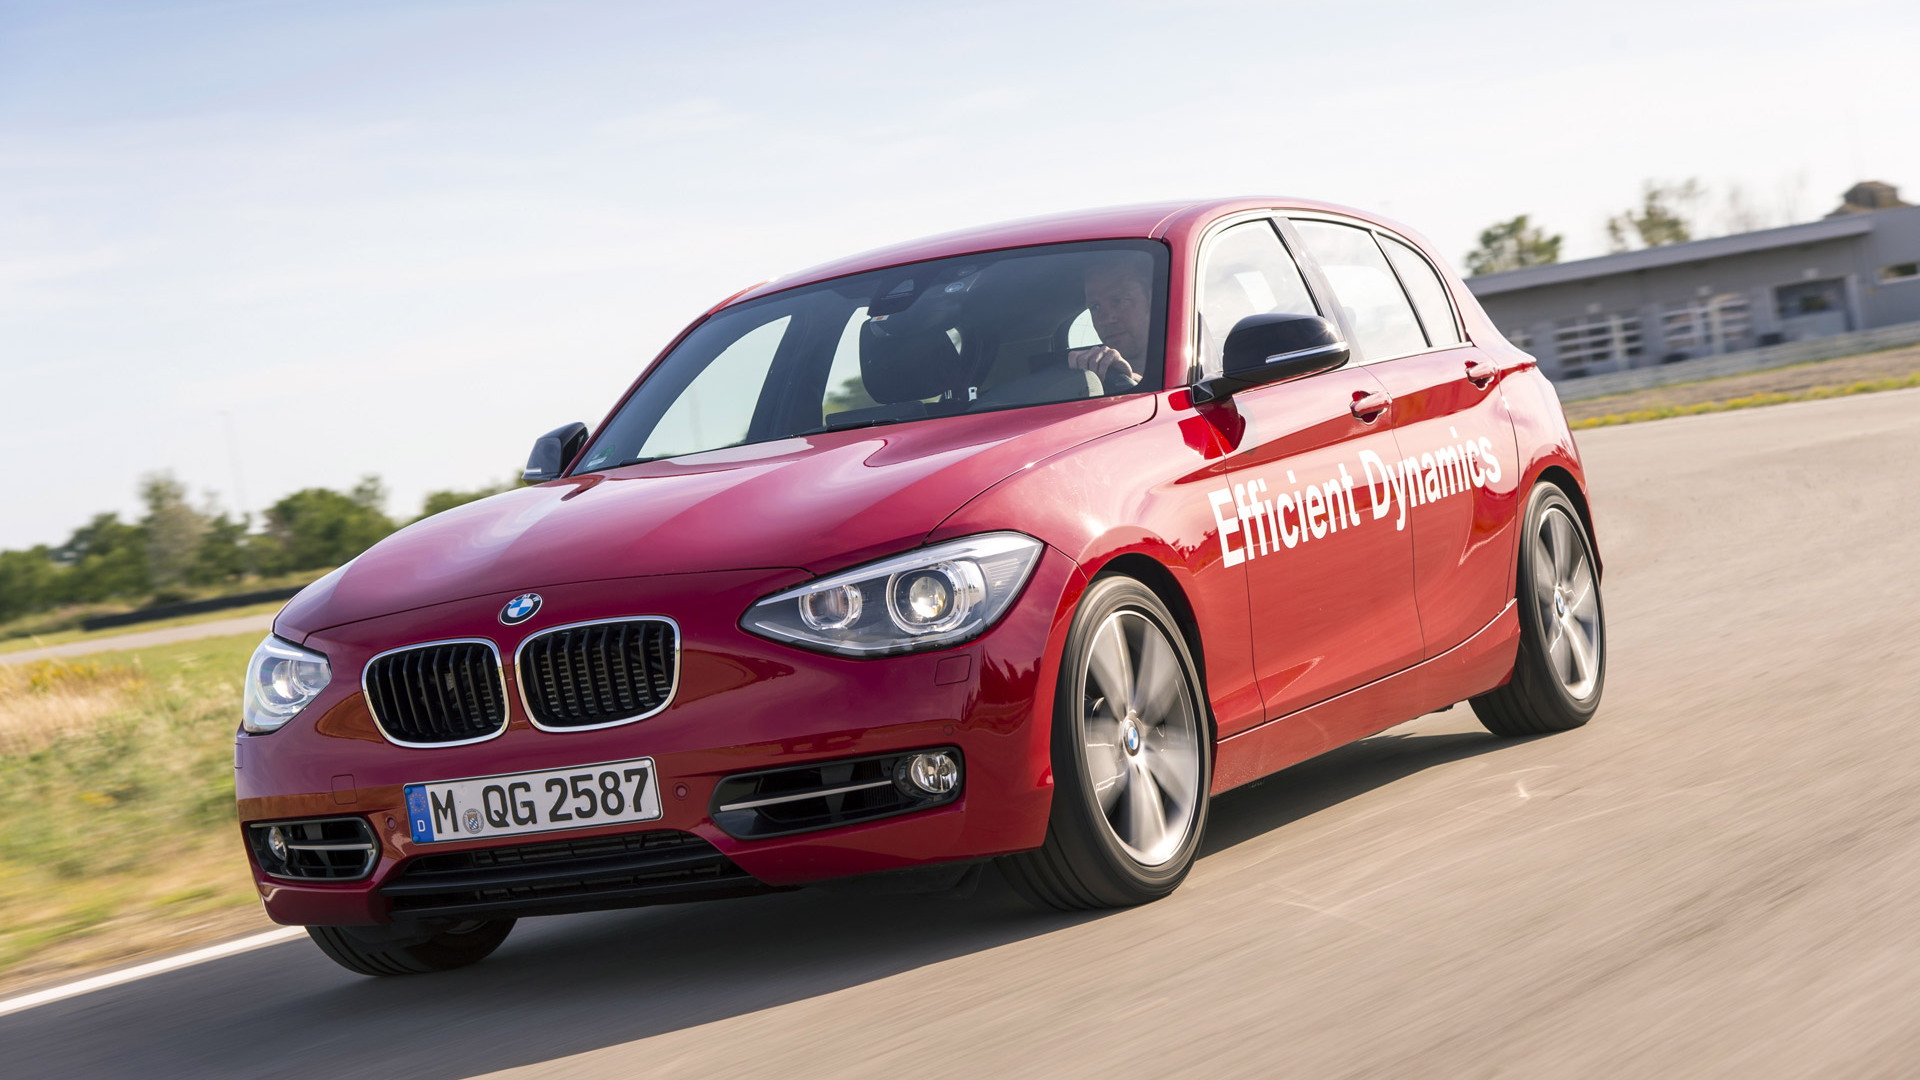 BMW 1-Series Hatchback prototype with direct water injection